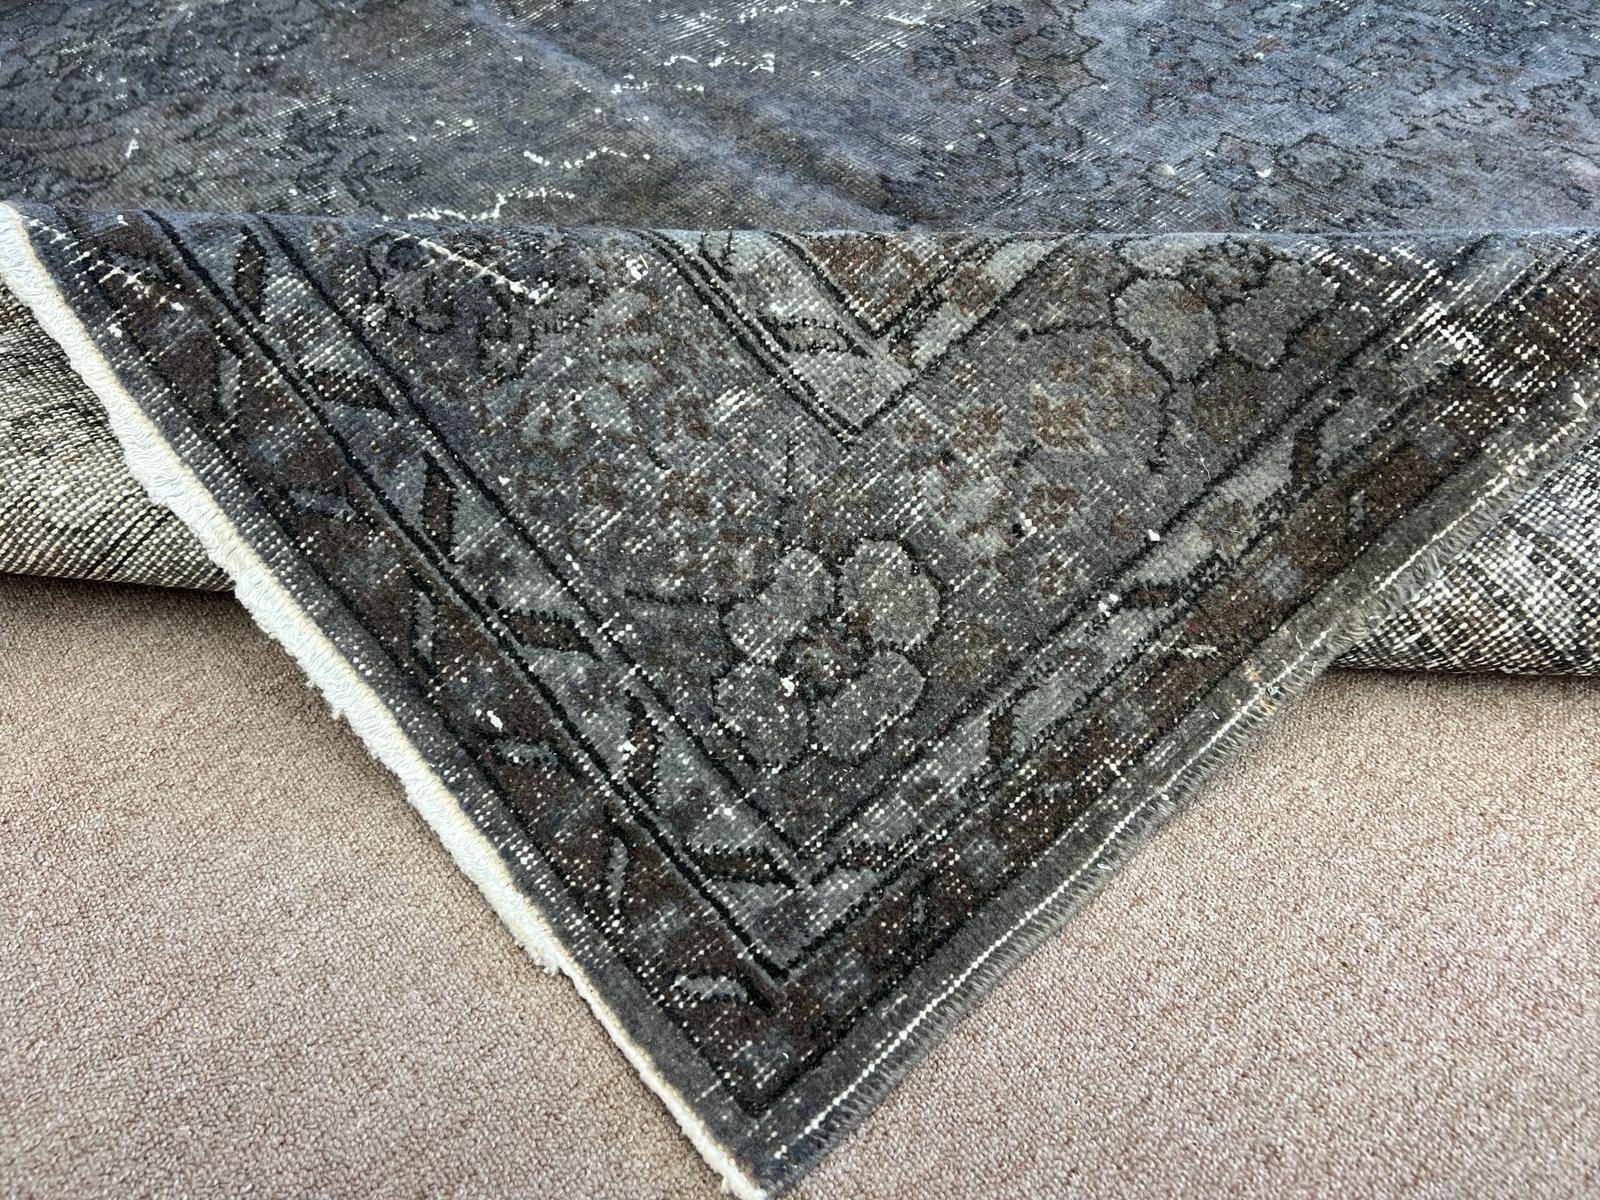 Hand-Knotted 7x11 Ft Handmade Turkish Wool Area Rug in Gray and Brown. Modern Upcycled Carpet For Sale